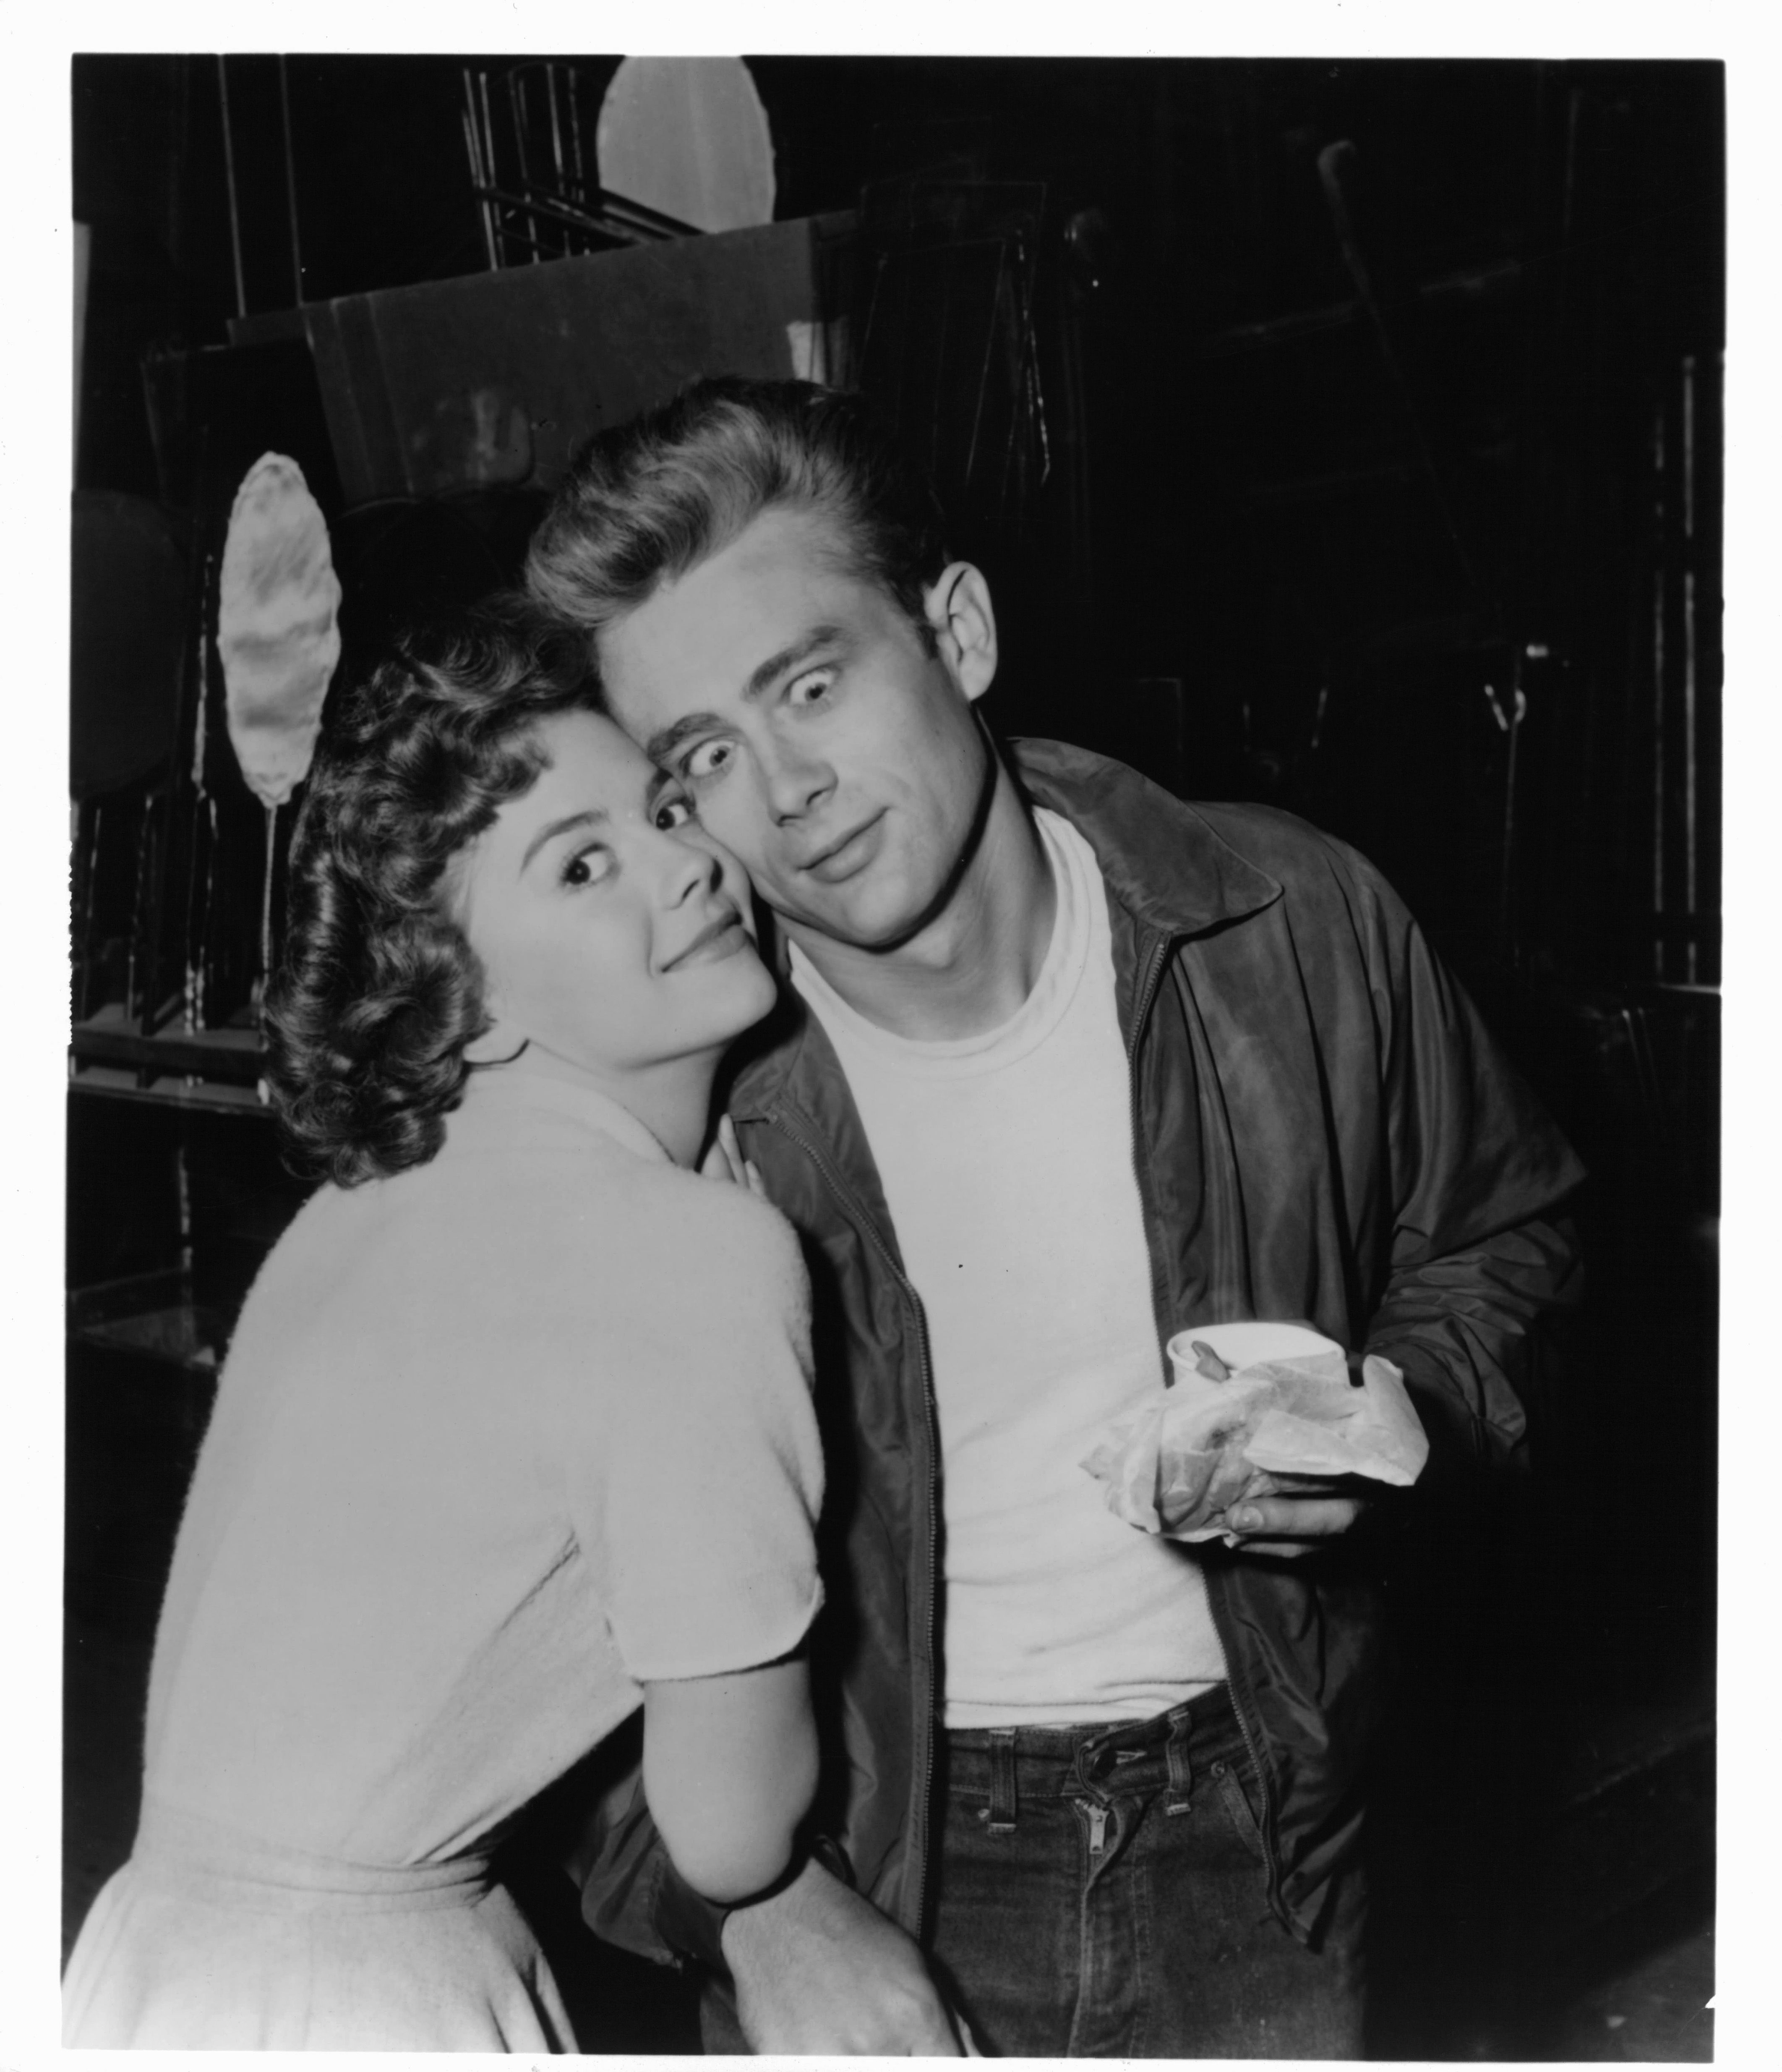 These Photos Reveal A Softer Side Of James Dean